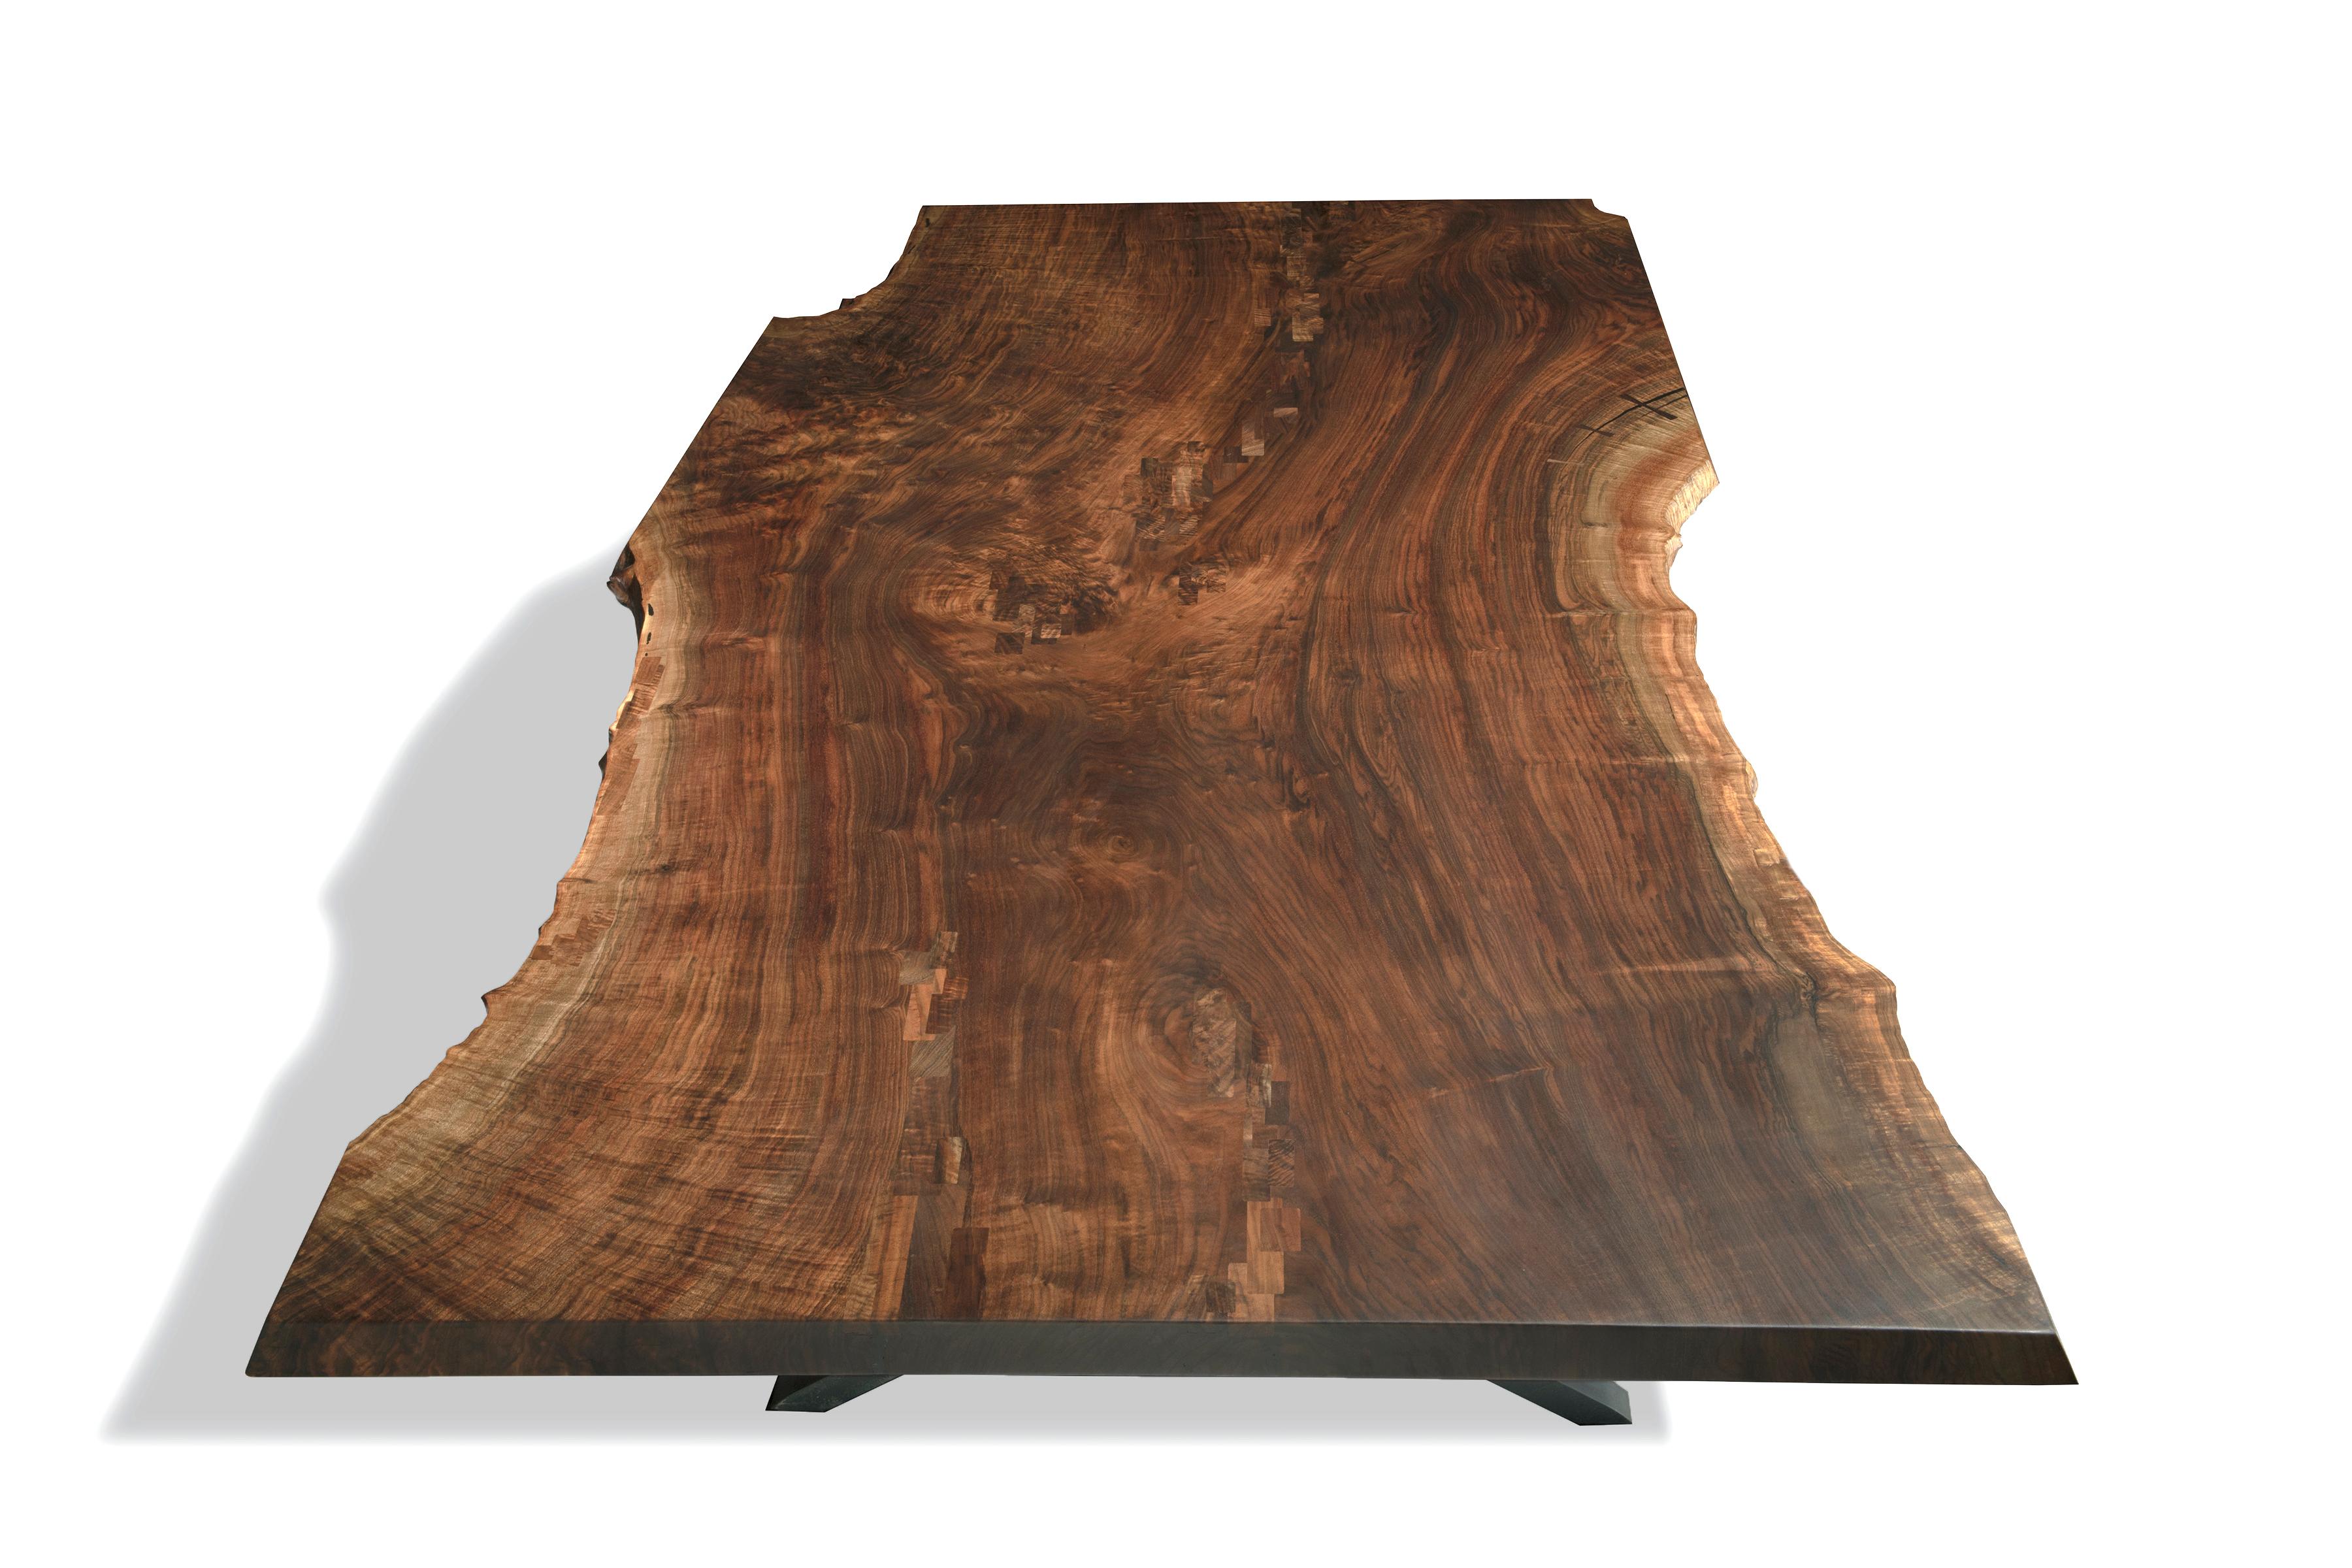 A huge single slab of museum grade California Claro walnut set atop oversized steel wishbone legs. Handcrafted from one of our 